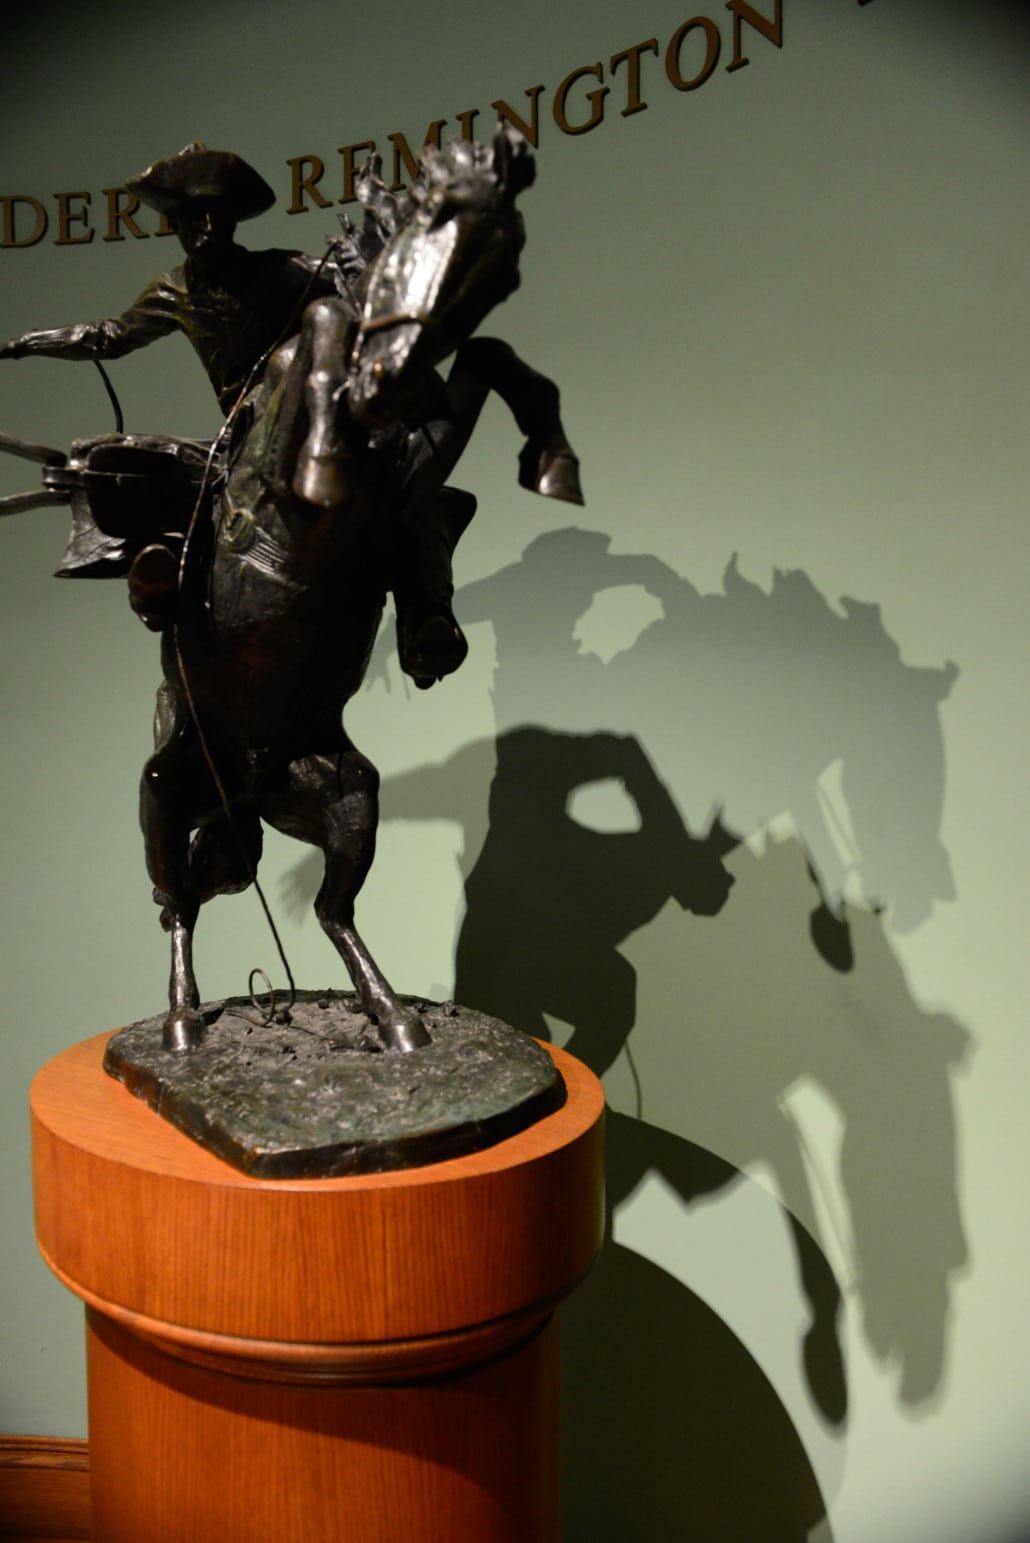 Original work at the Frederic Remington Art Museum in Ogdensburg, NY